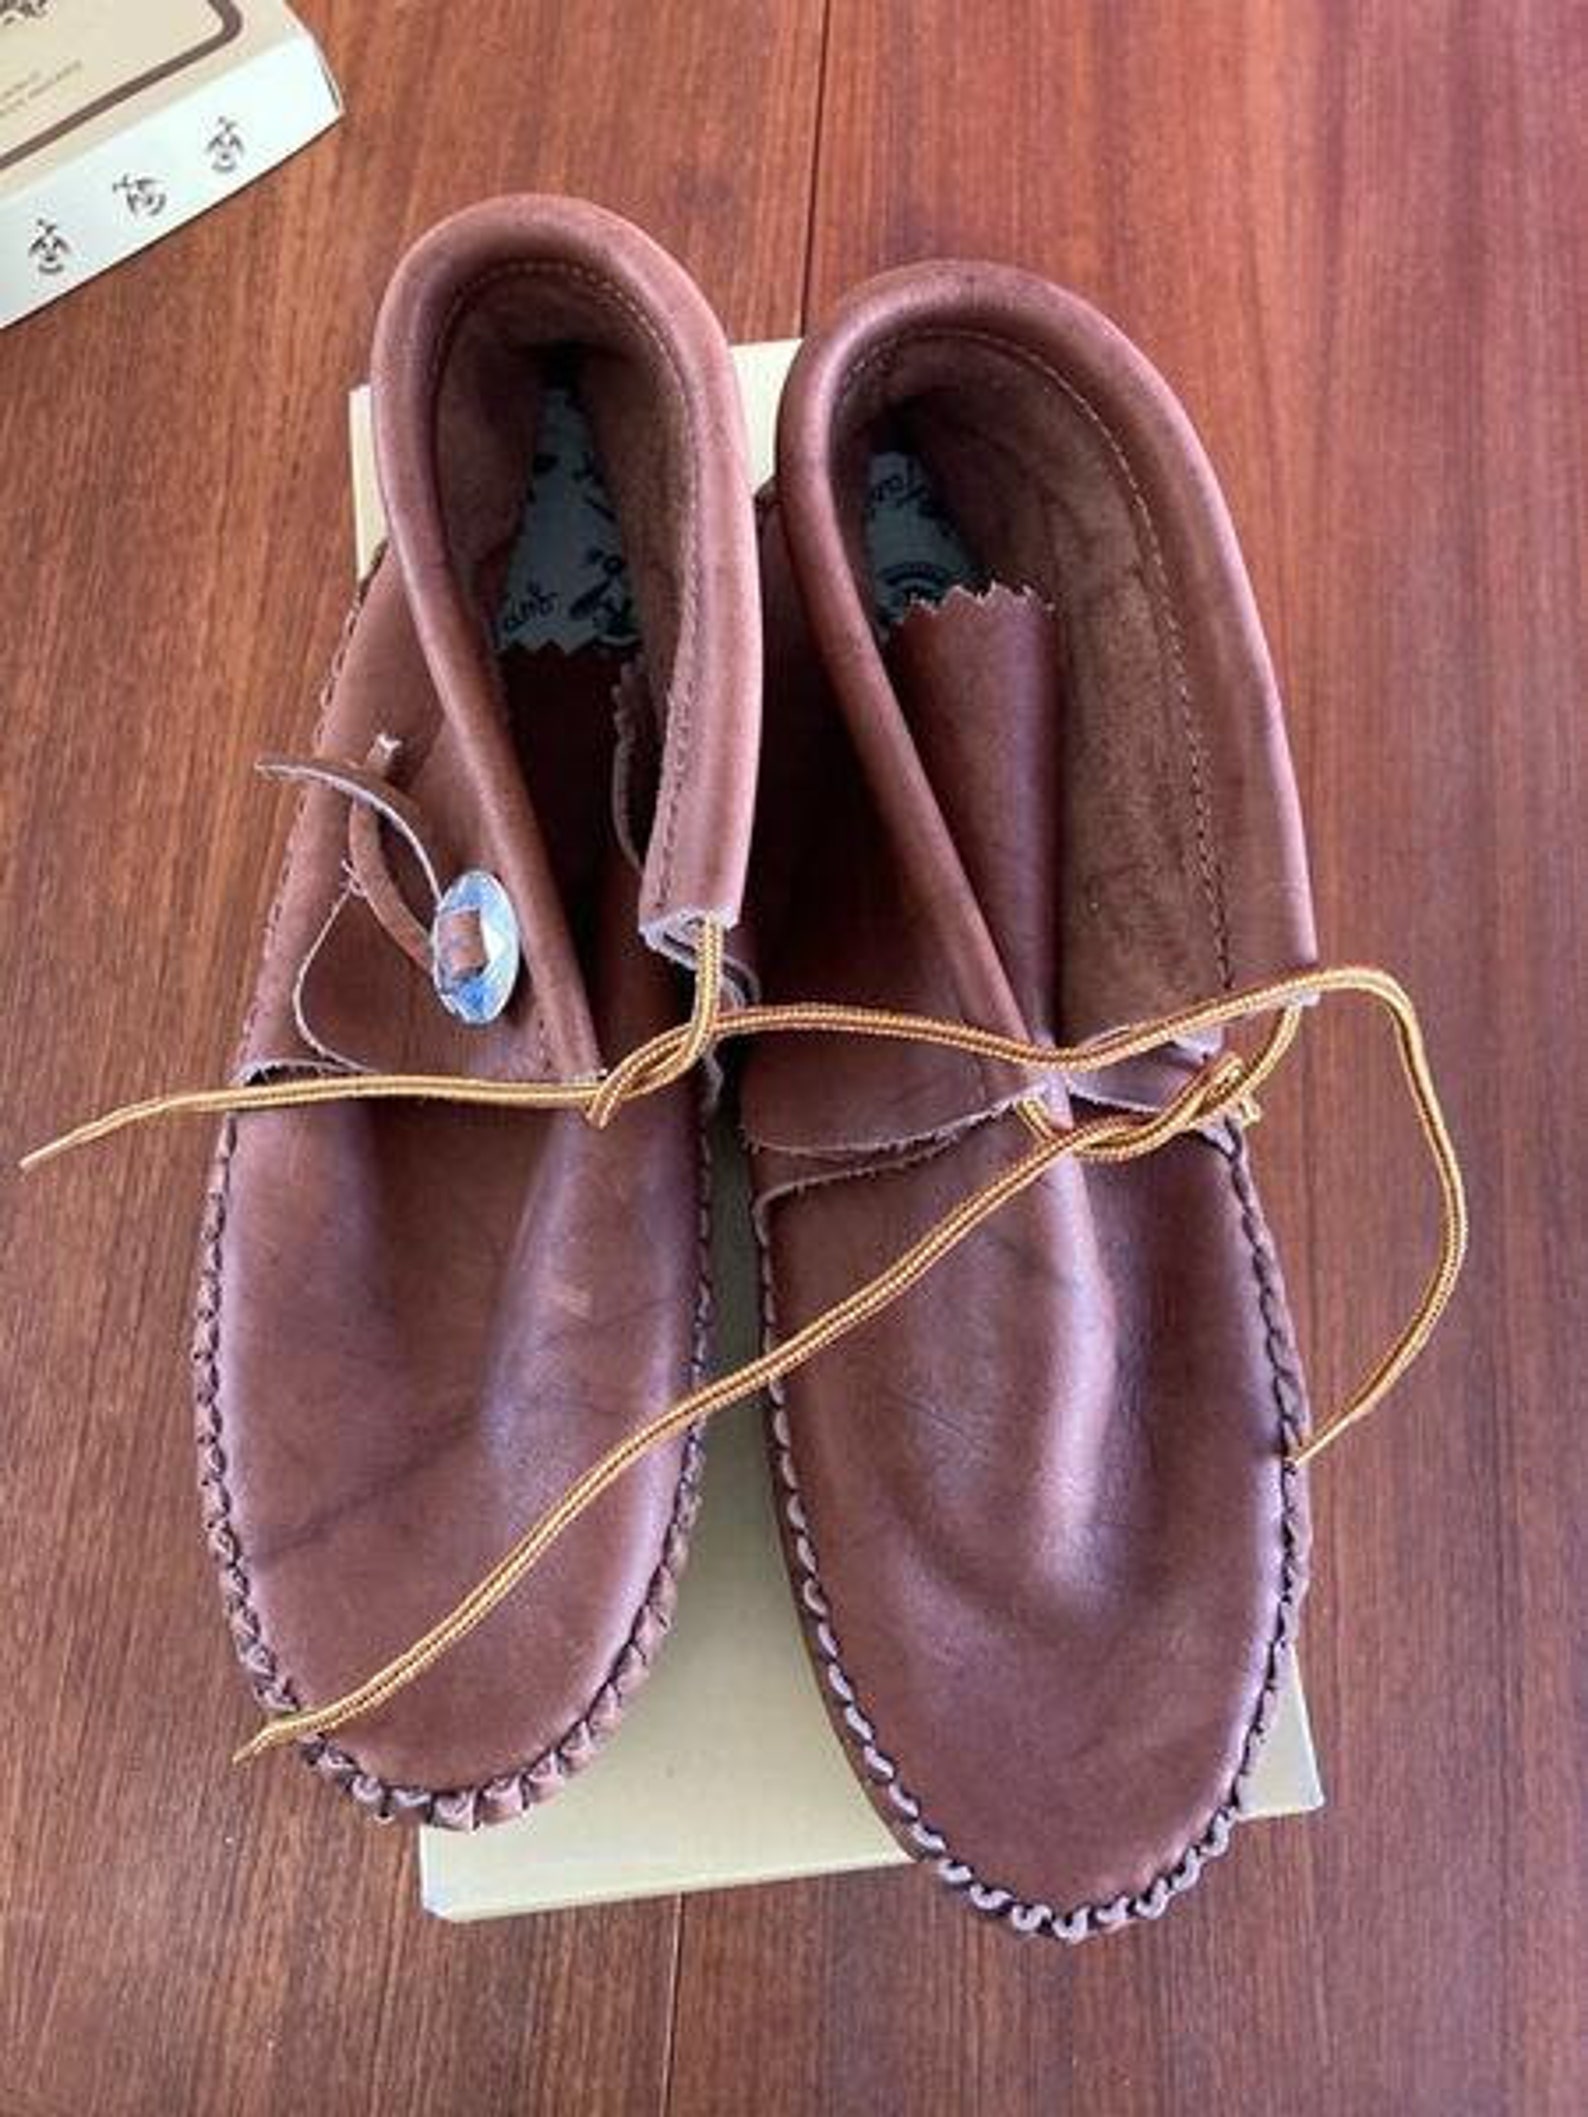 Vintage Men's Leather Moccasins. New in Box. Size 8 | Etsy